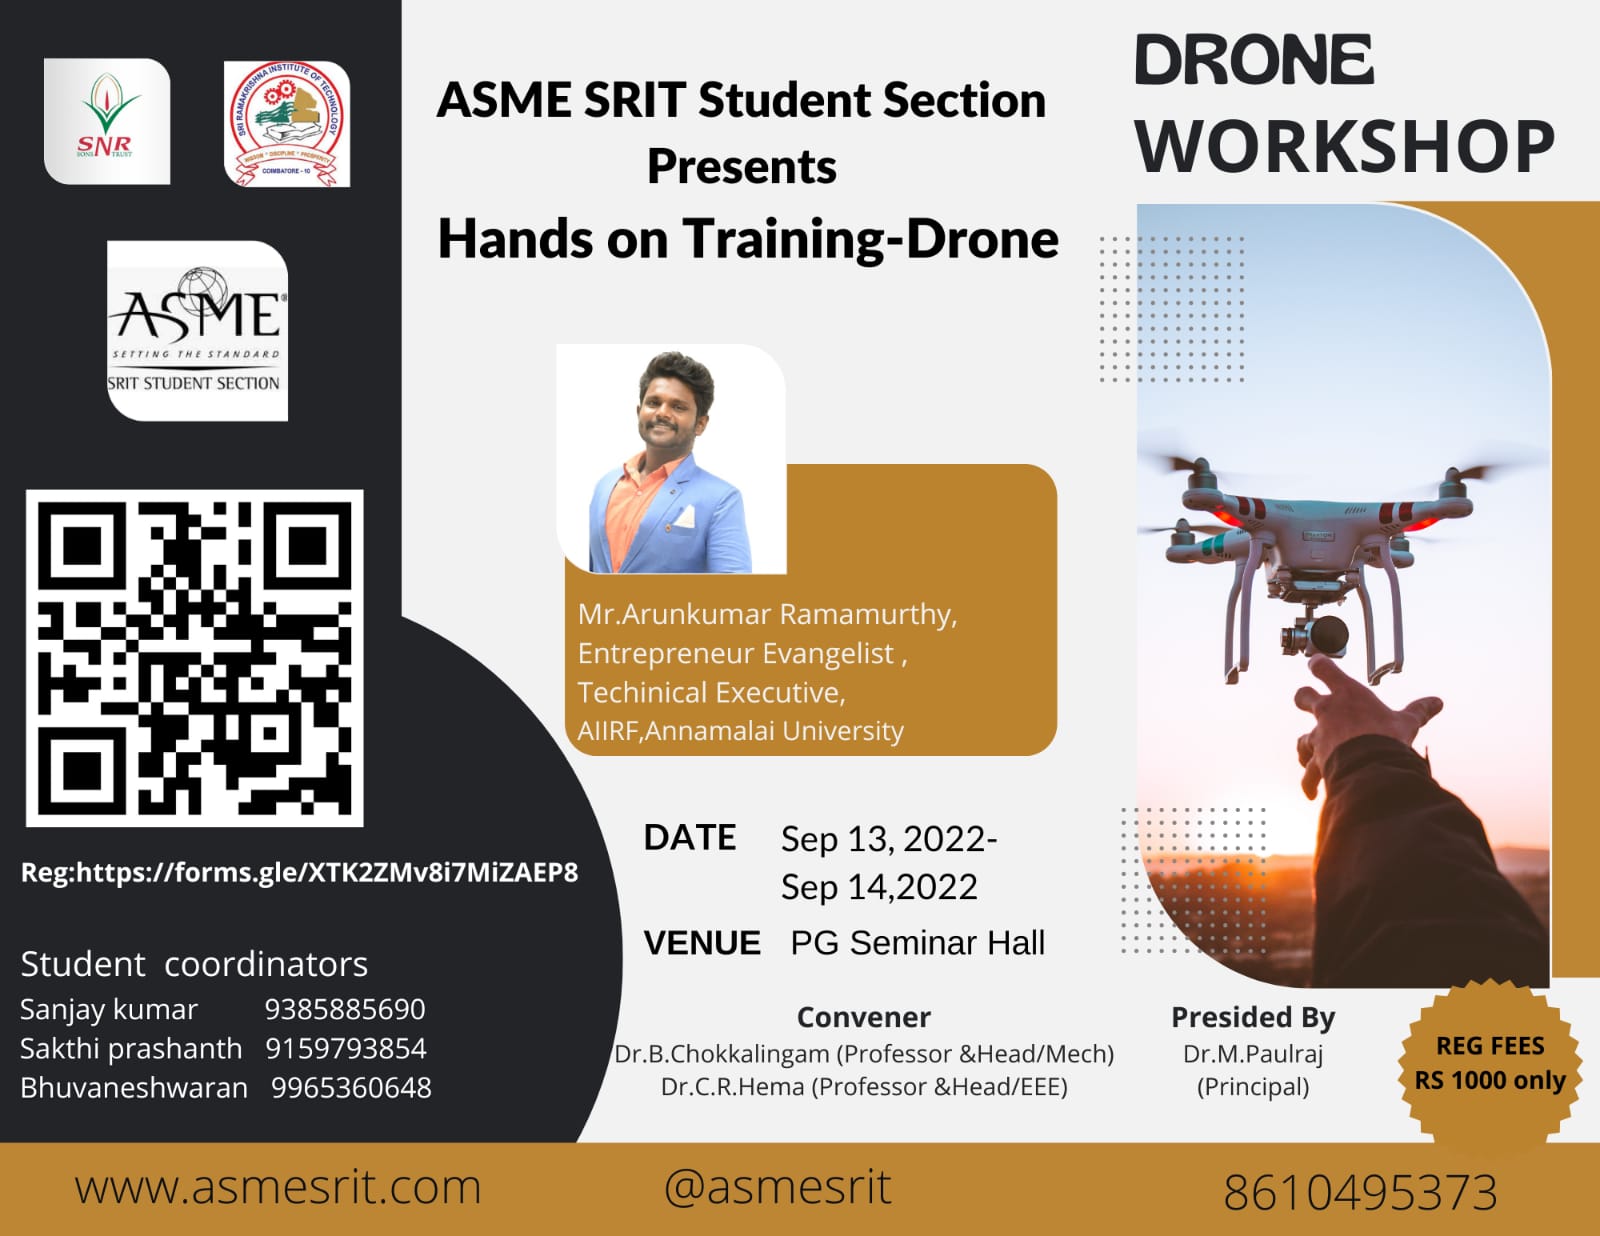 Hands on Training-Drone 2022